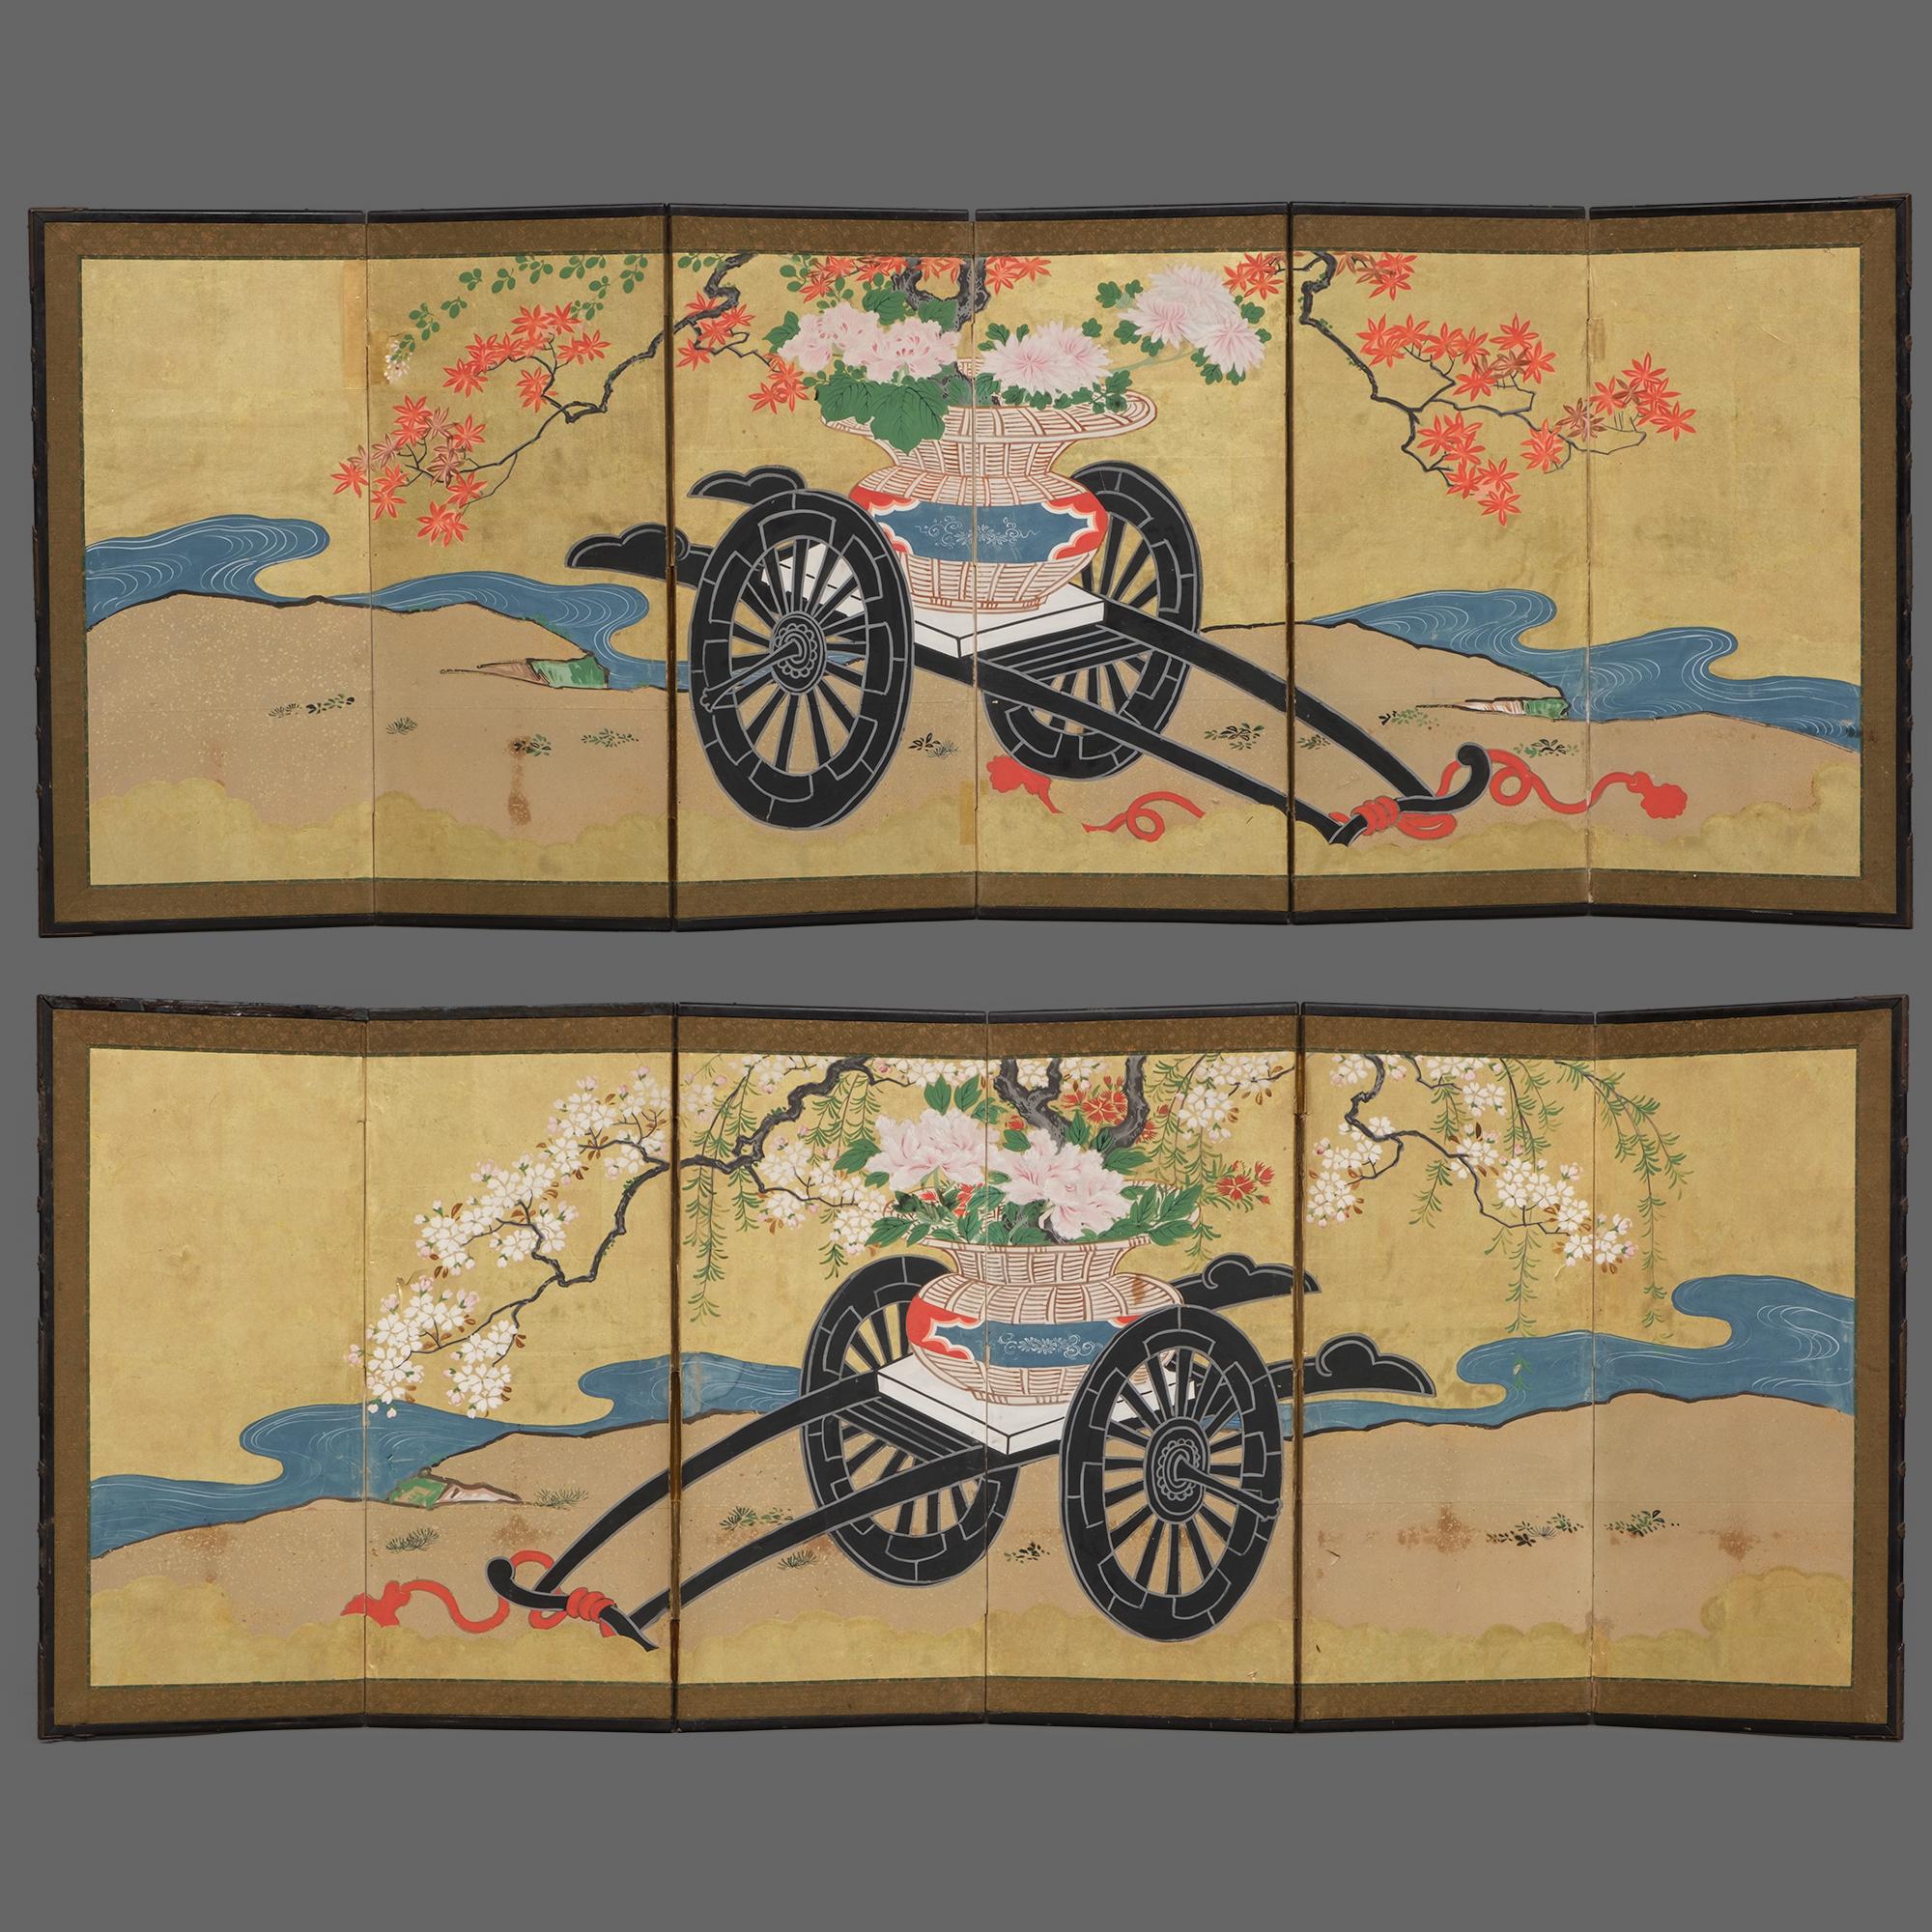 An amazing pair of six-panel hinagata byôbu (doll festival folding screens) with a continuous painting on gold leaf showcasing flower carts (hana’guruma) at the edge of a winding river.
Both laden with a large bamboo basket (hanakago) overflowing